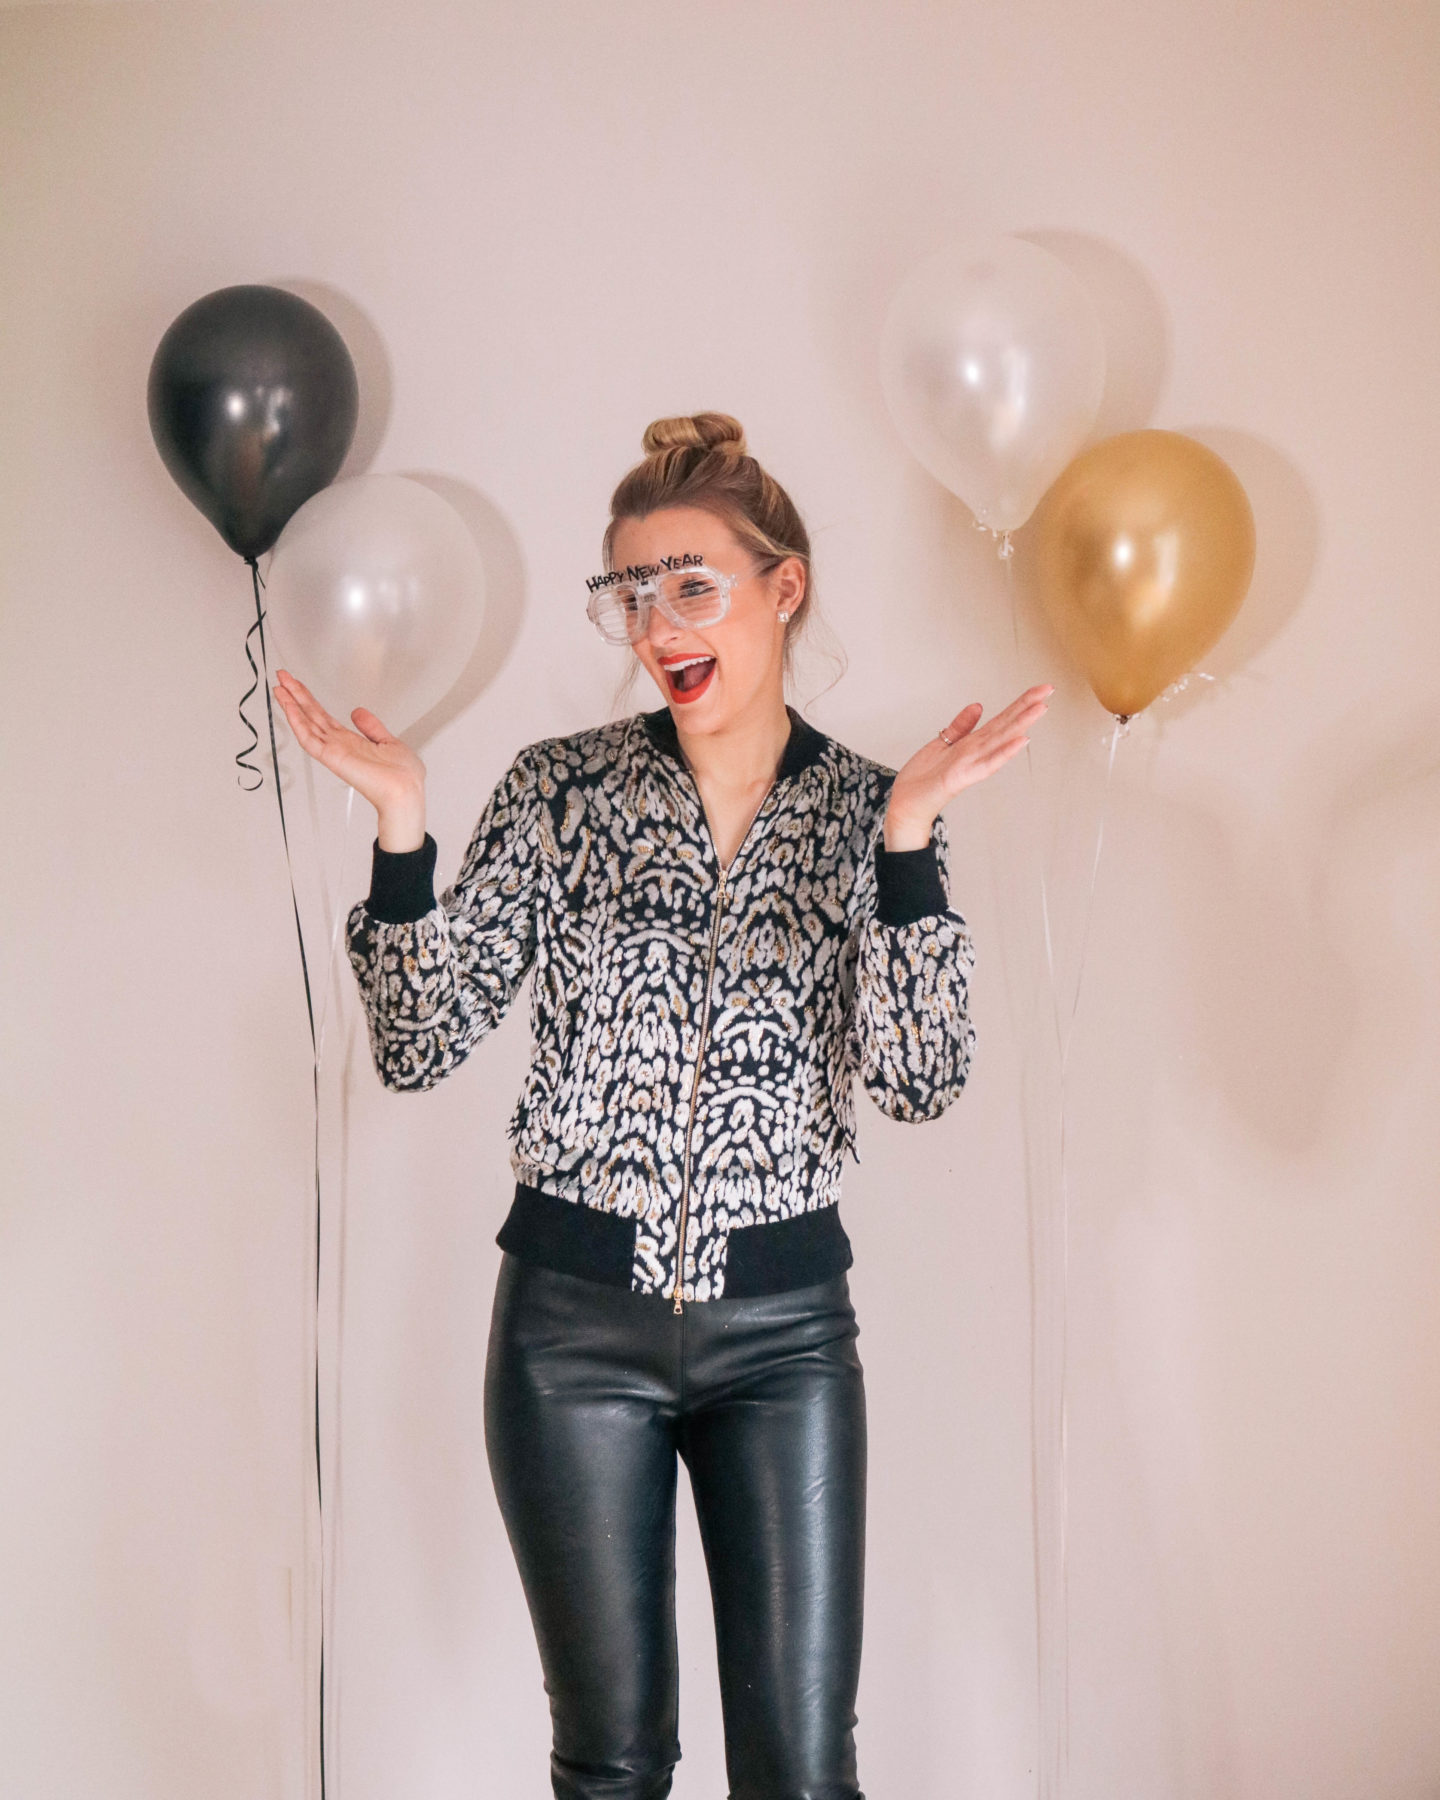 Fashion blogger, Leigha Gardner, of The Lilac Press sharing some designer looks for NYE including this velvet Adam Lippes bomber jacket and Stella McCartney faux leather leggings.